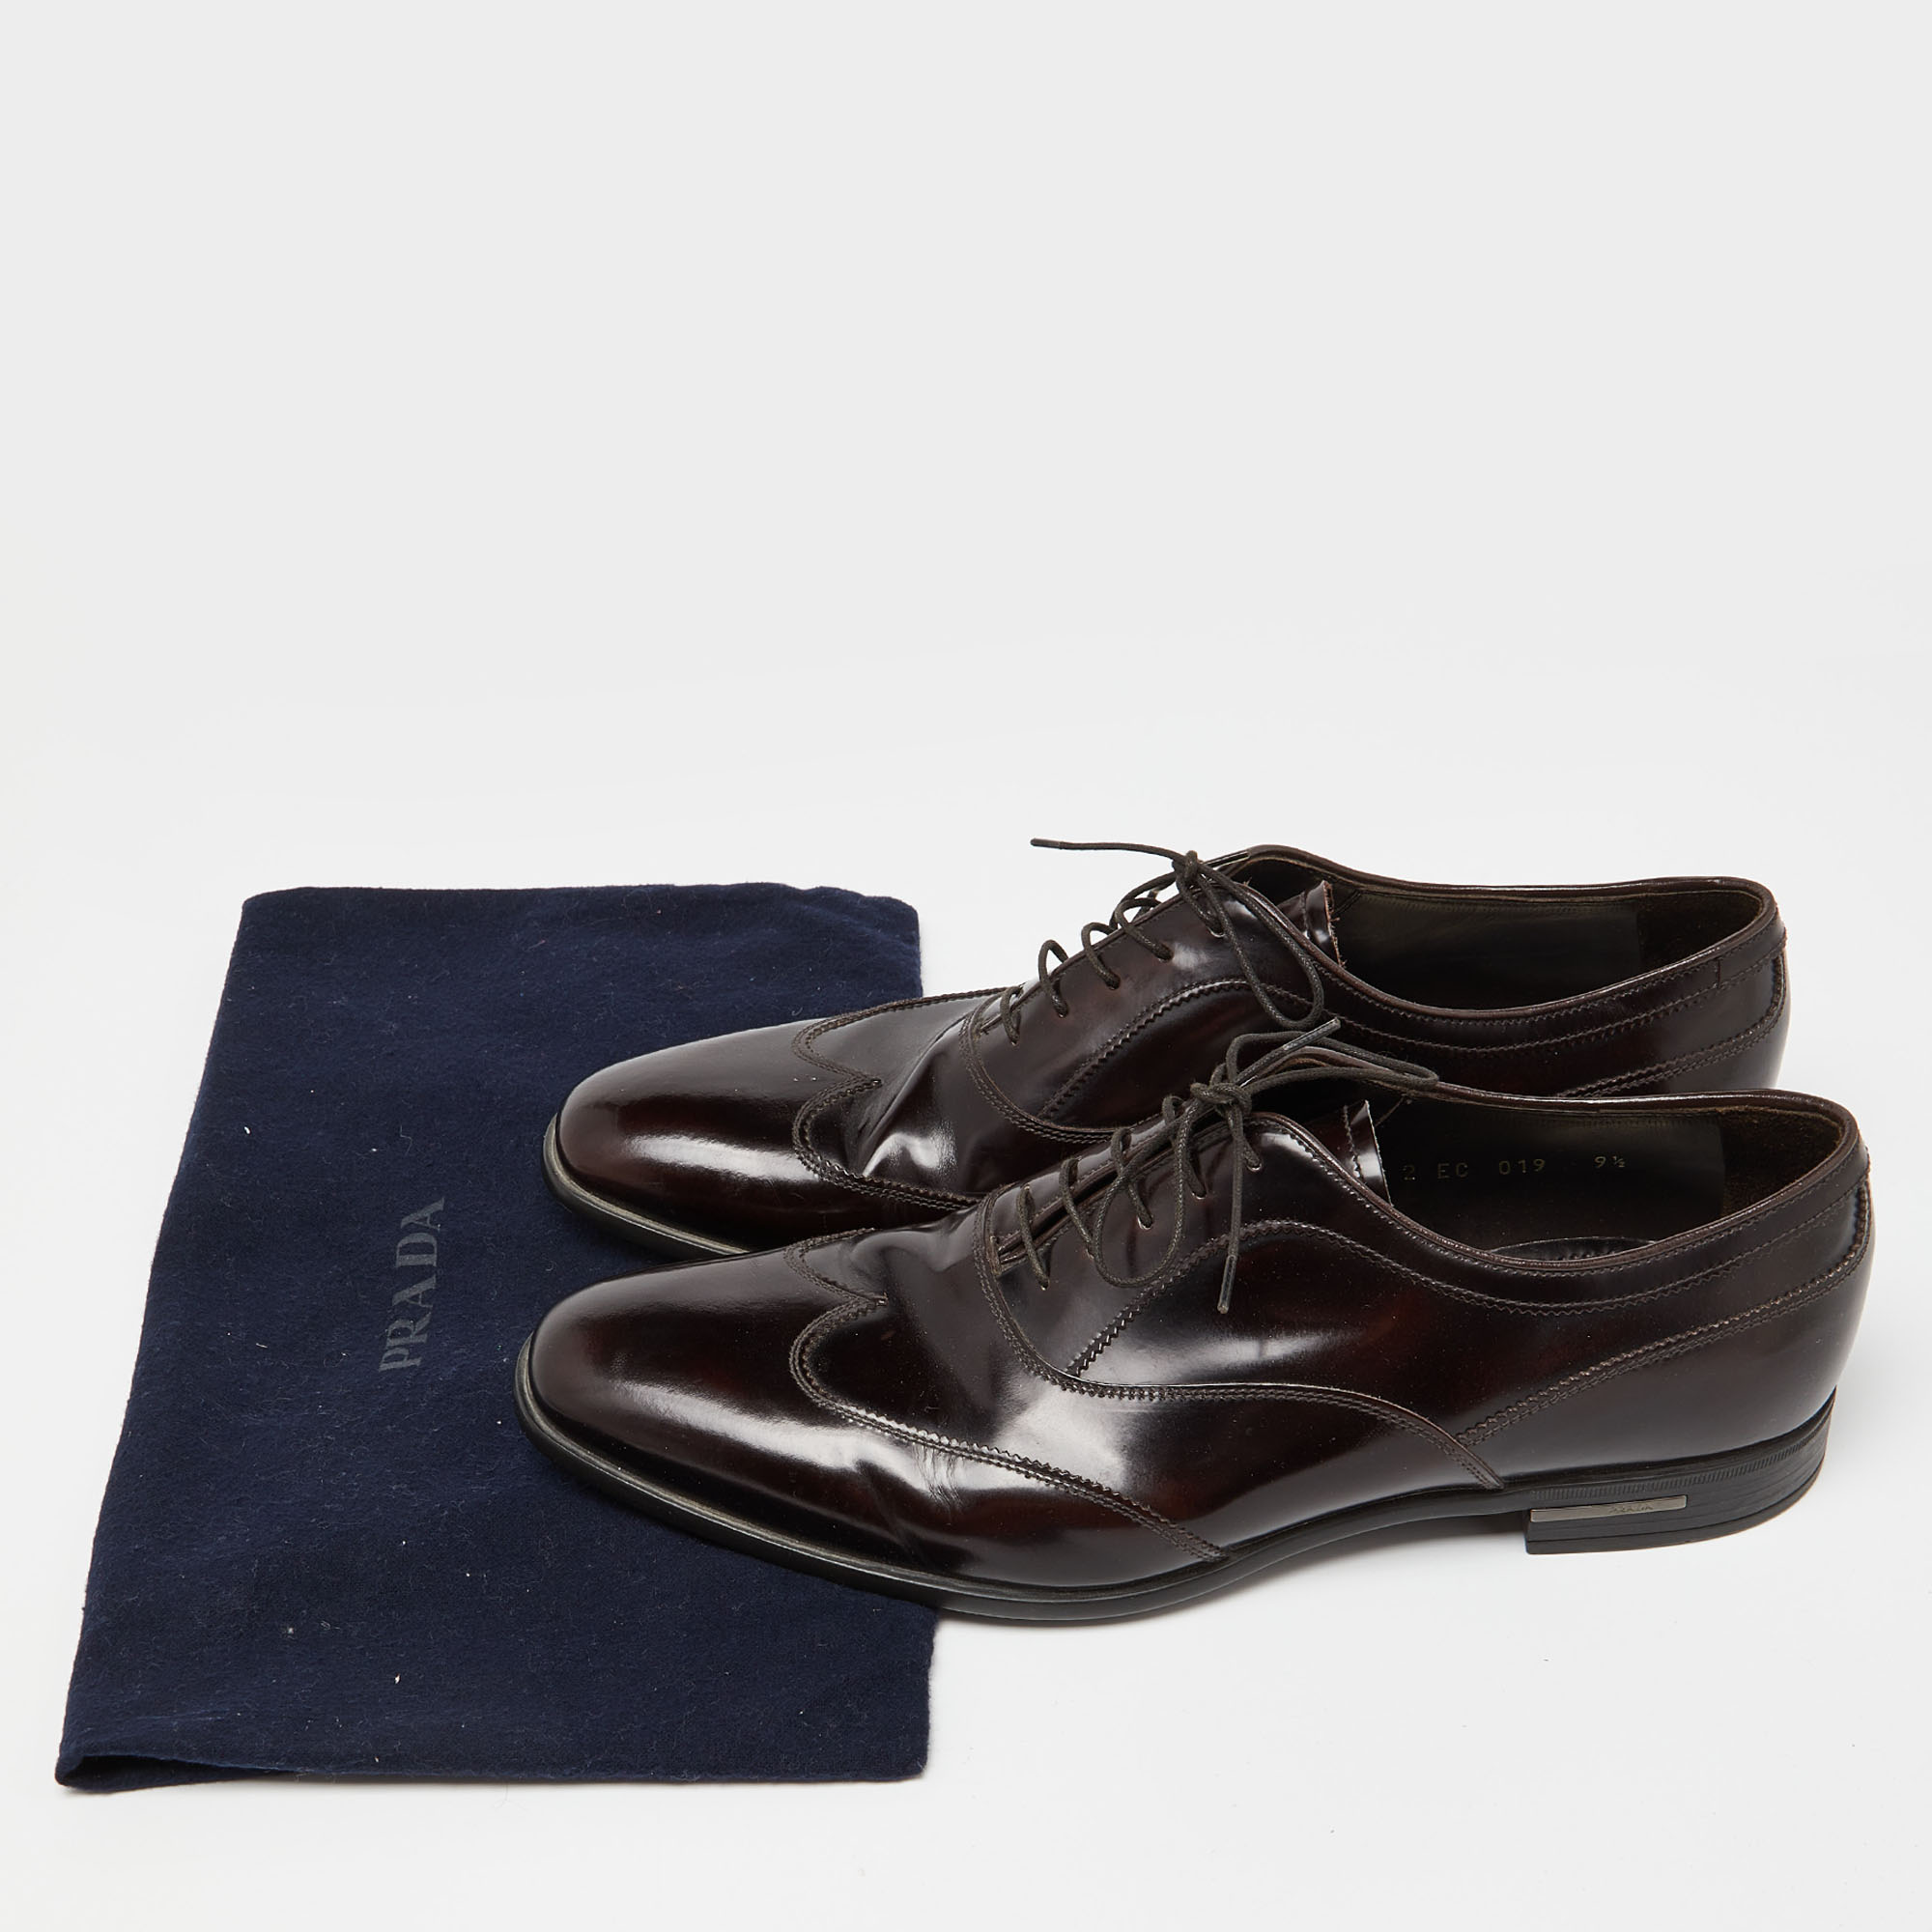 Prada Brown Patent Leather Lace Up Oxfords Size 43.5